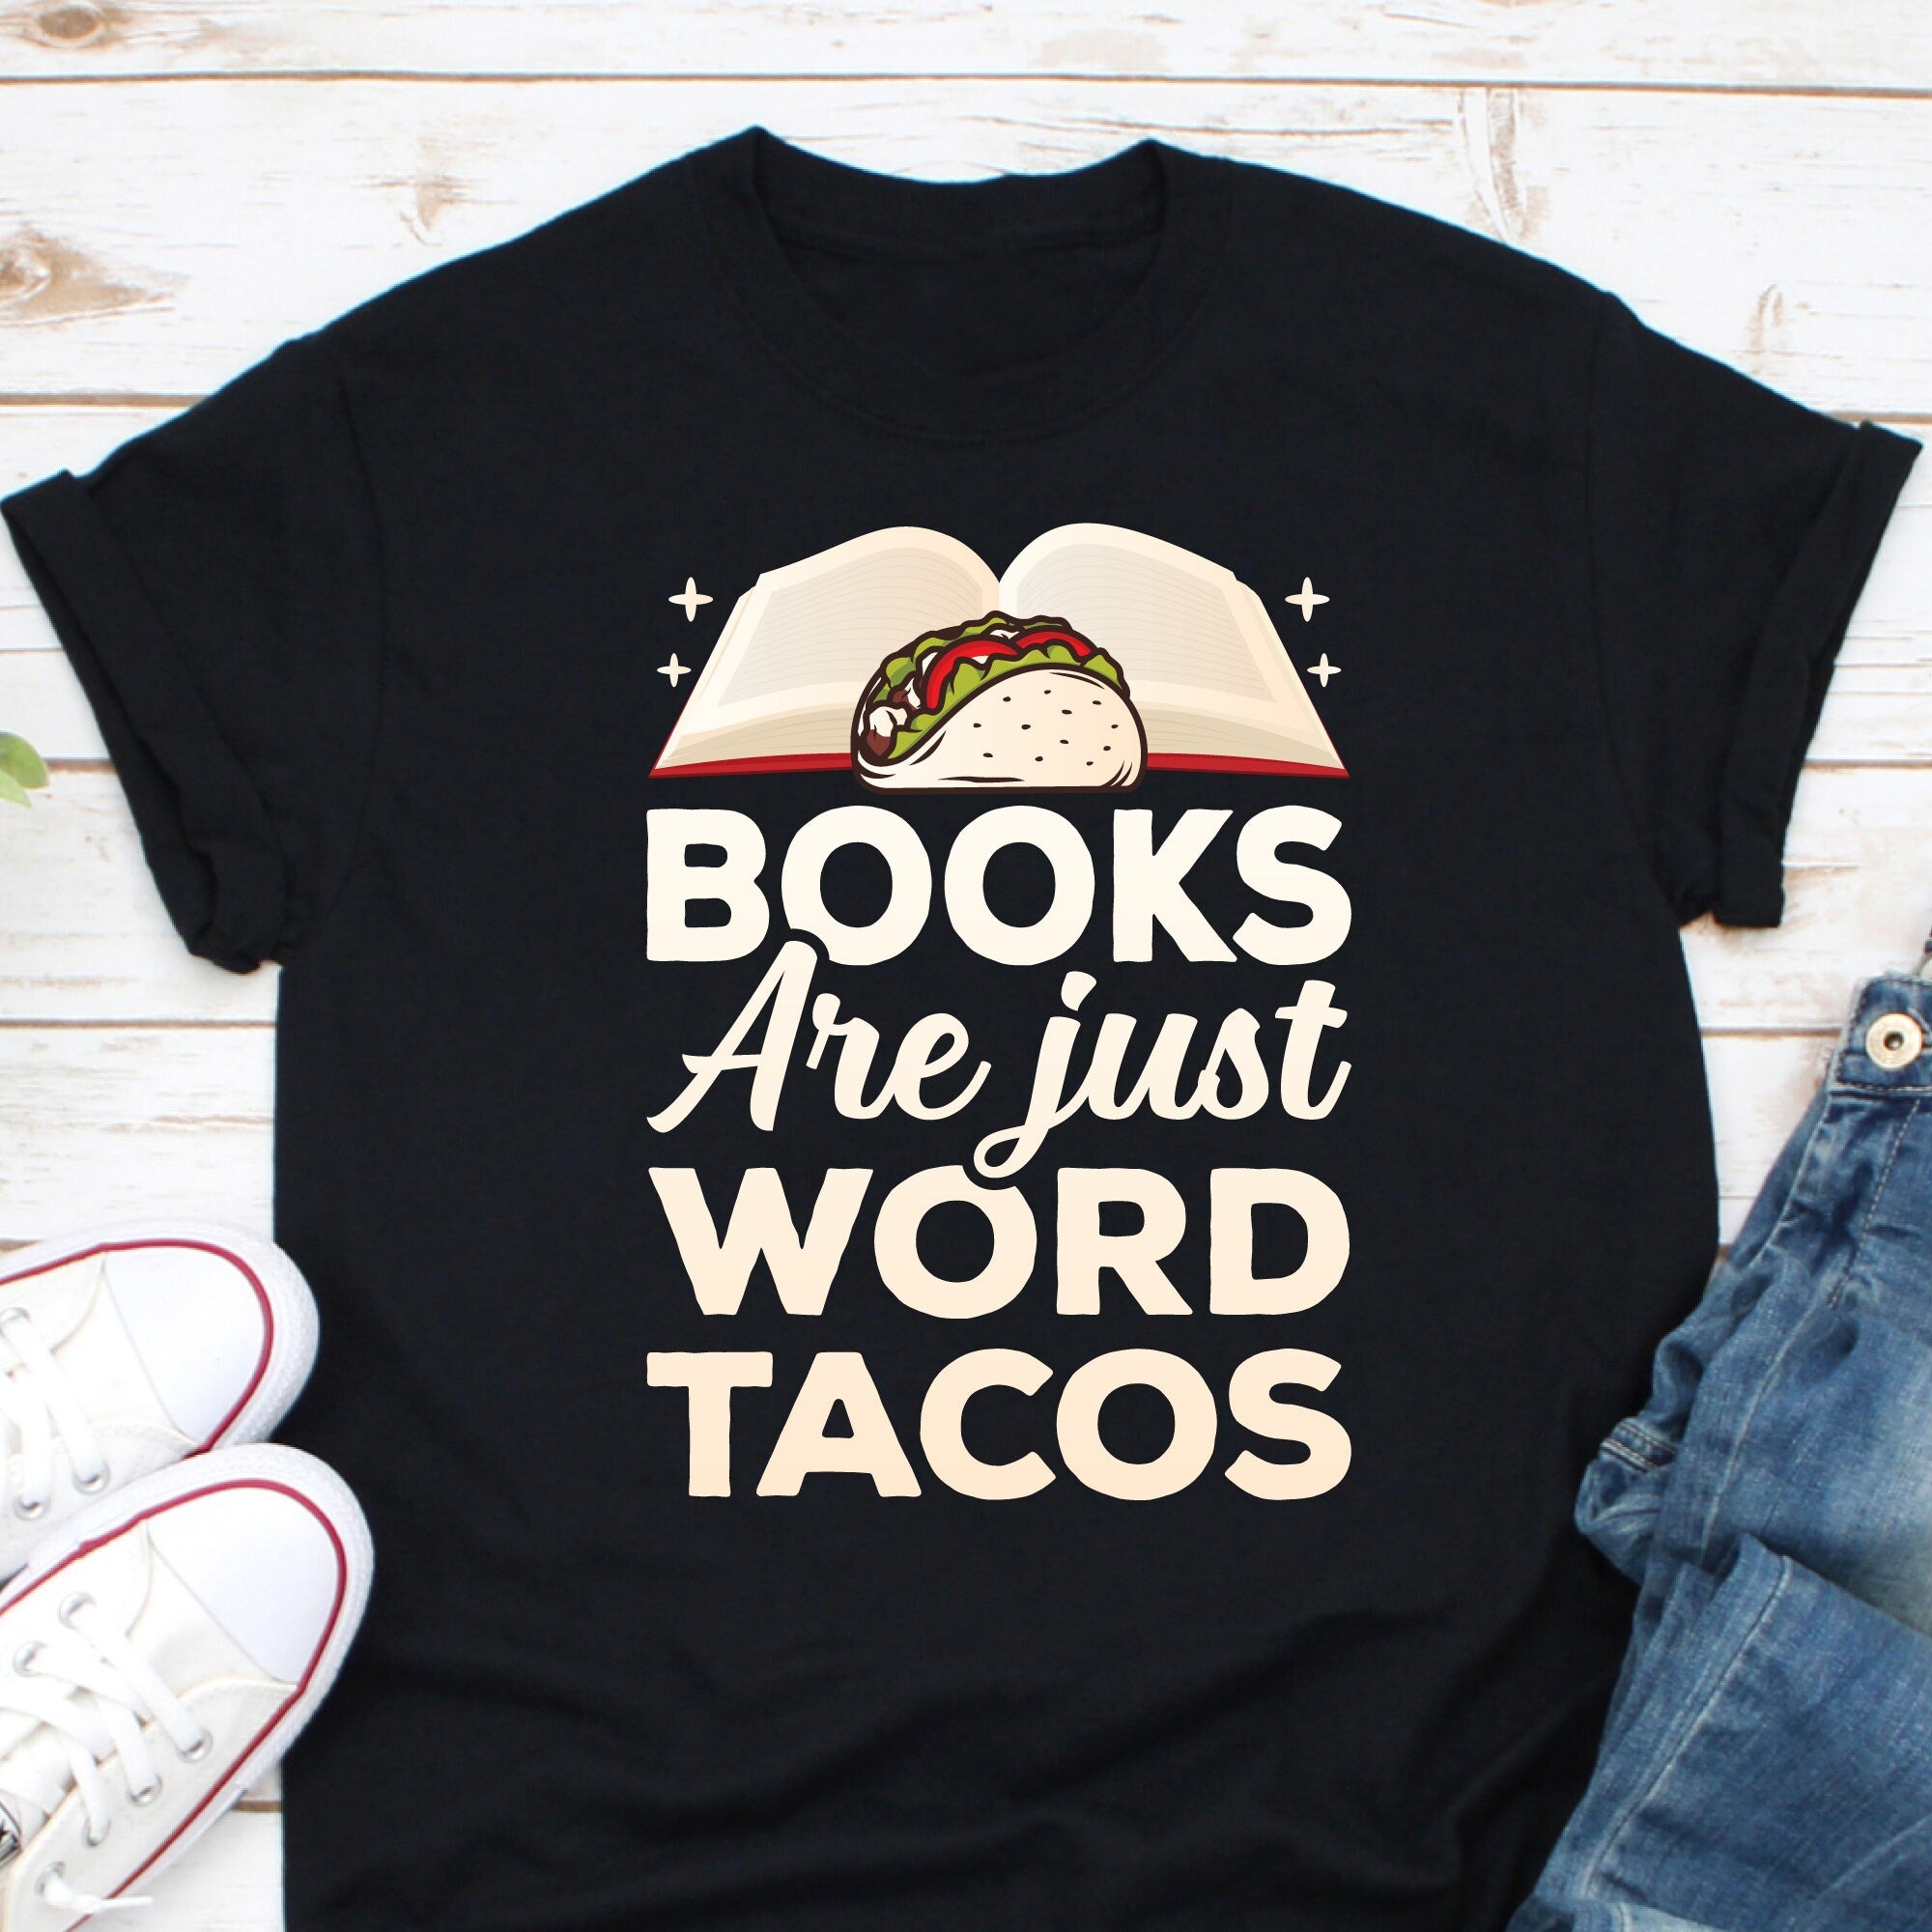 Books Are Just Word Tacos Shirt, Book Lover Shirt, Bookish Shirt, Book Reading Shirt, Book Nerd Shirt